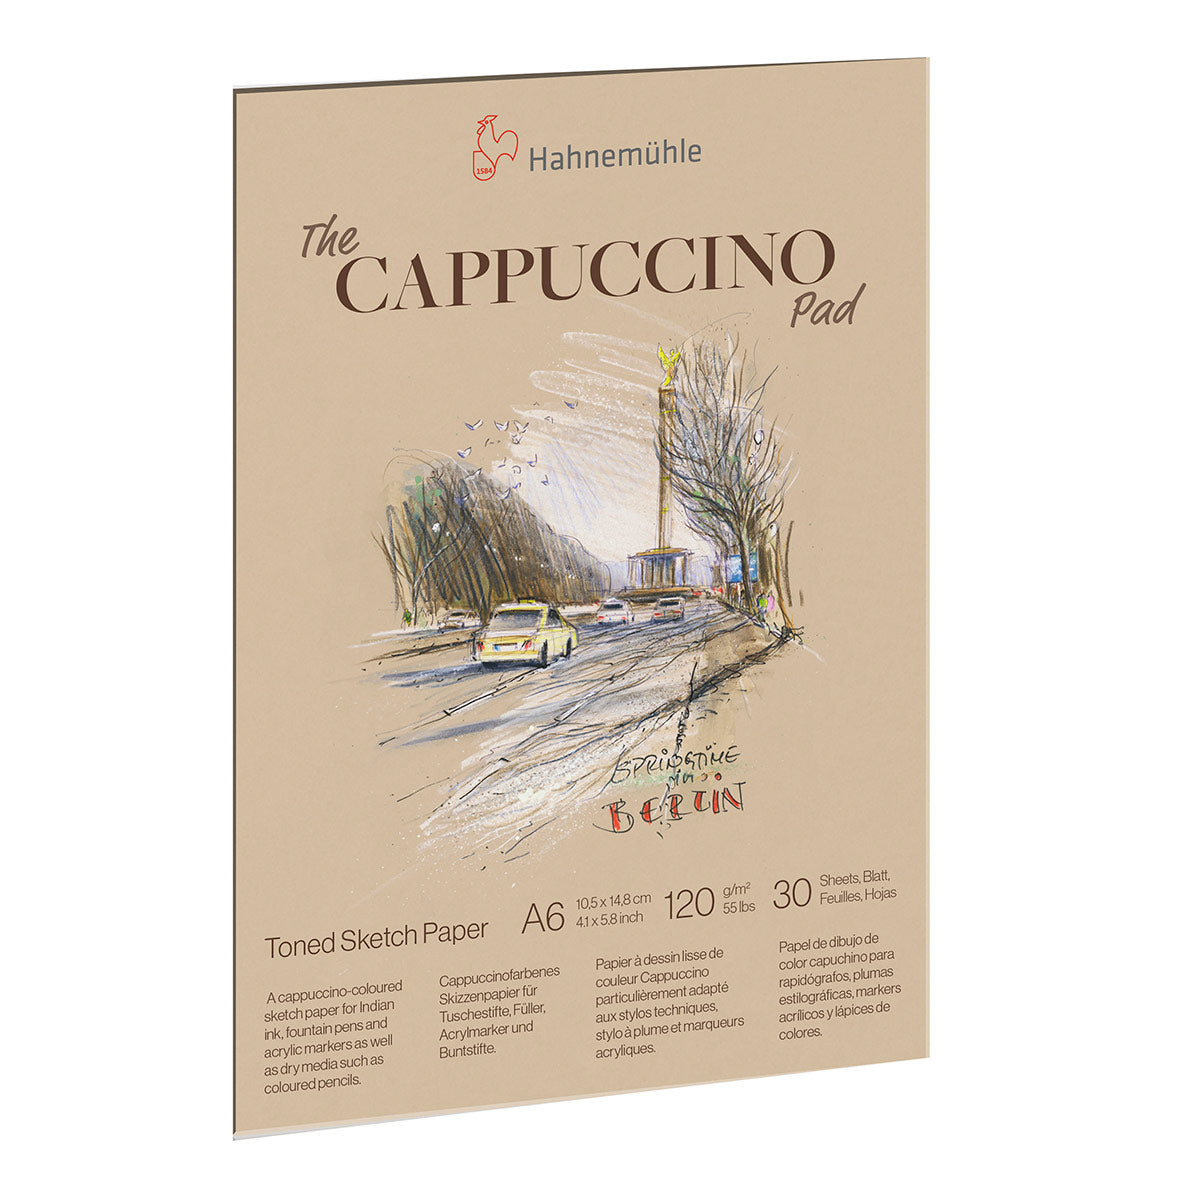 Hahnemuhle - Cappuccino Paper Sketch Pad A6